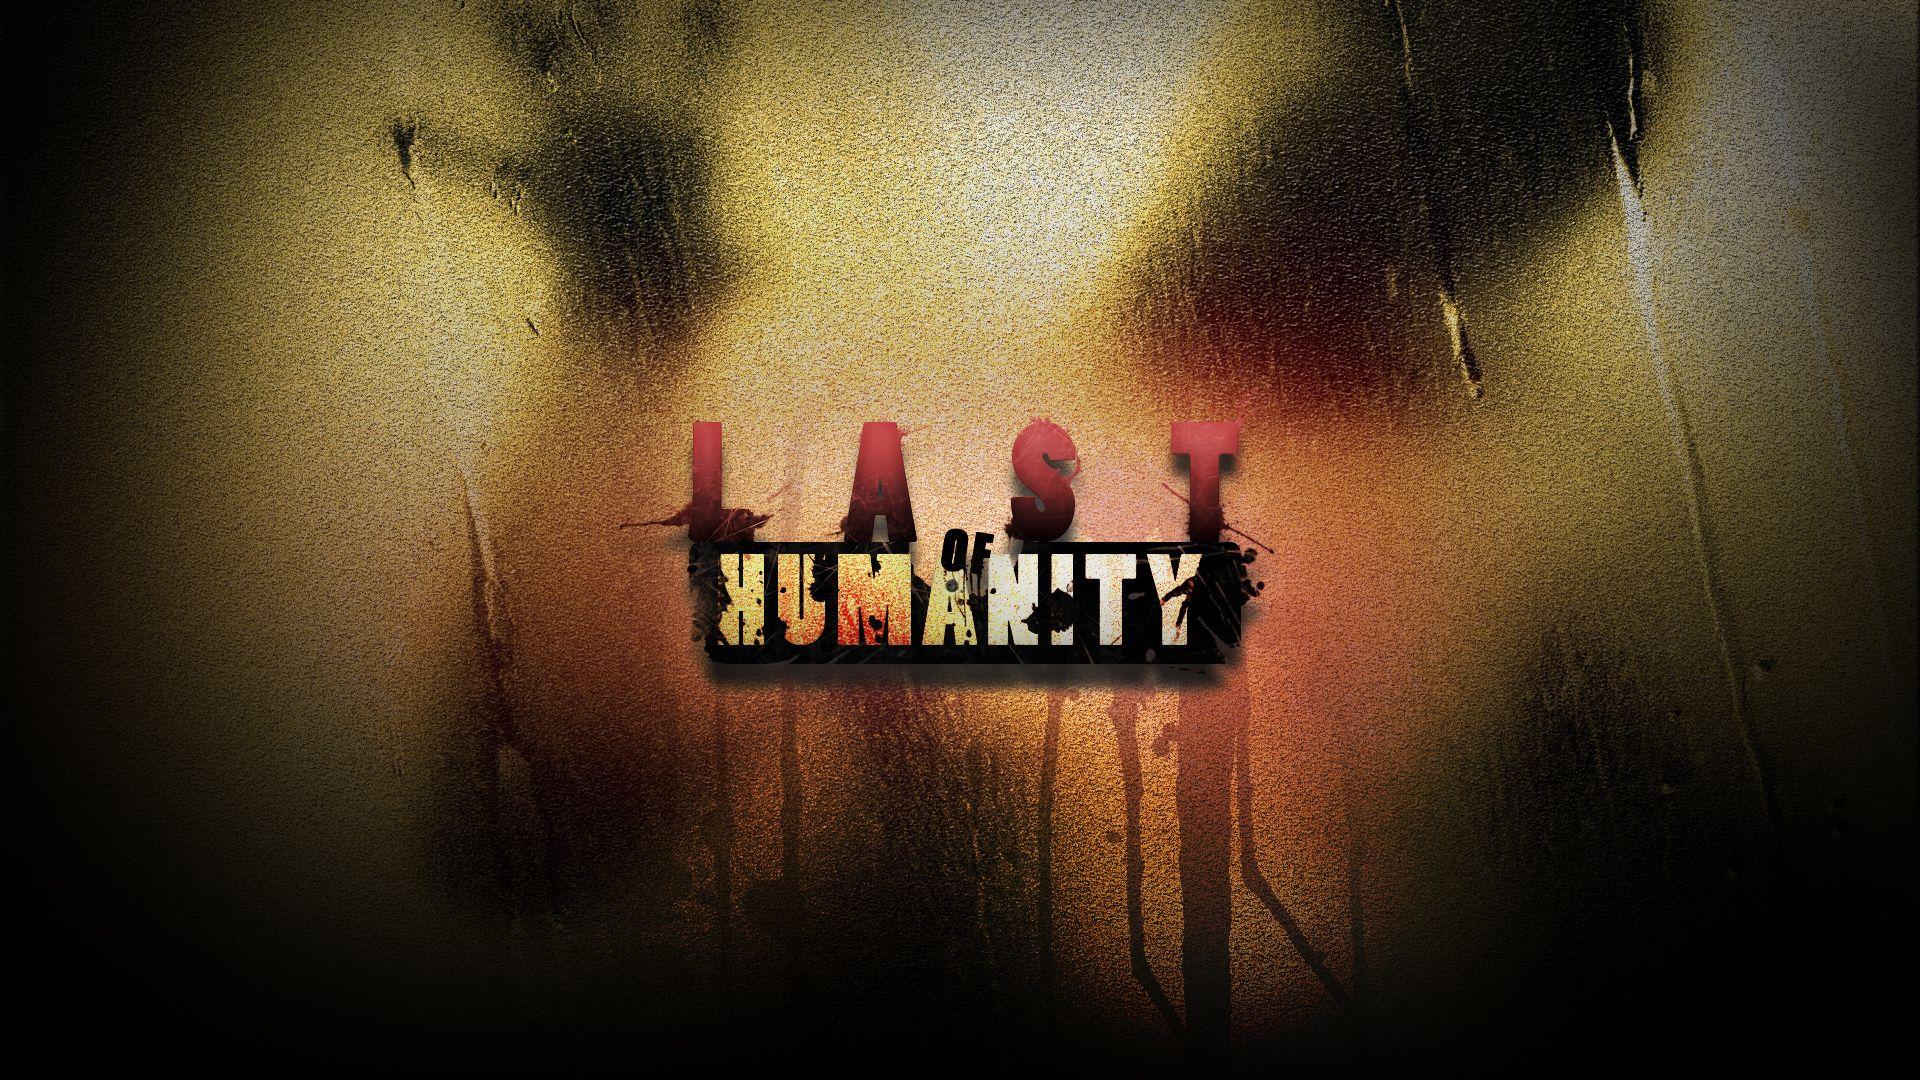 Humanity Wallpaper, Humanity HQFX Picture, Free Download